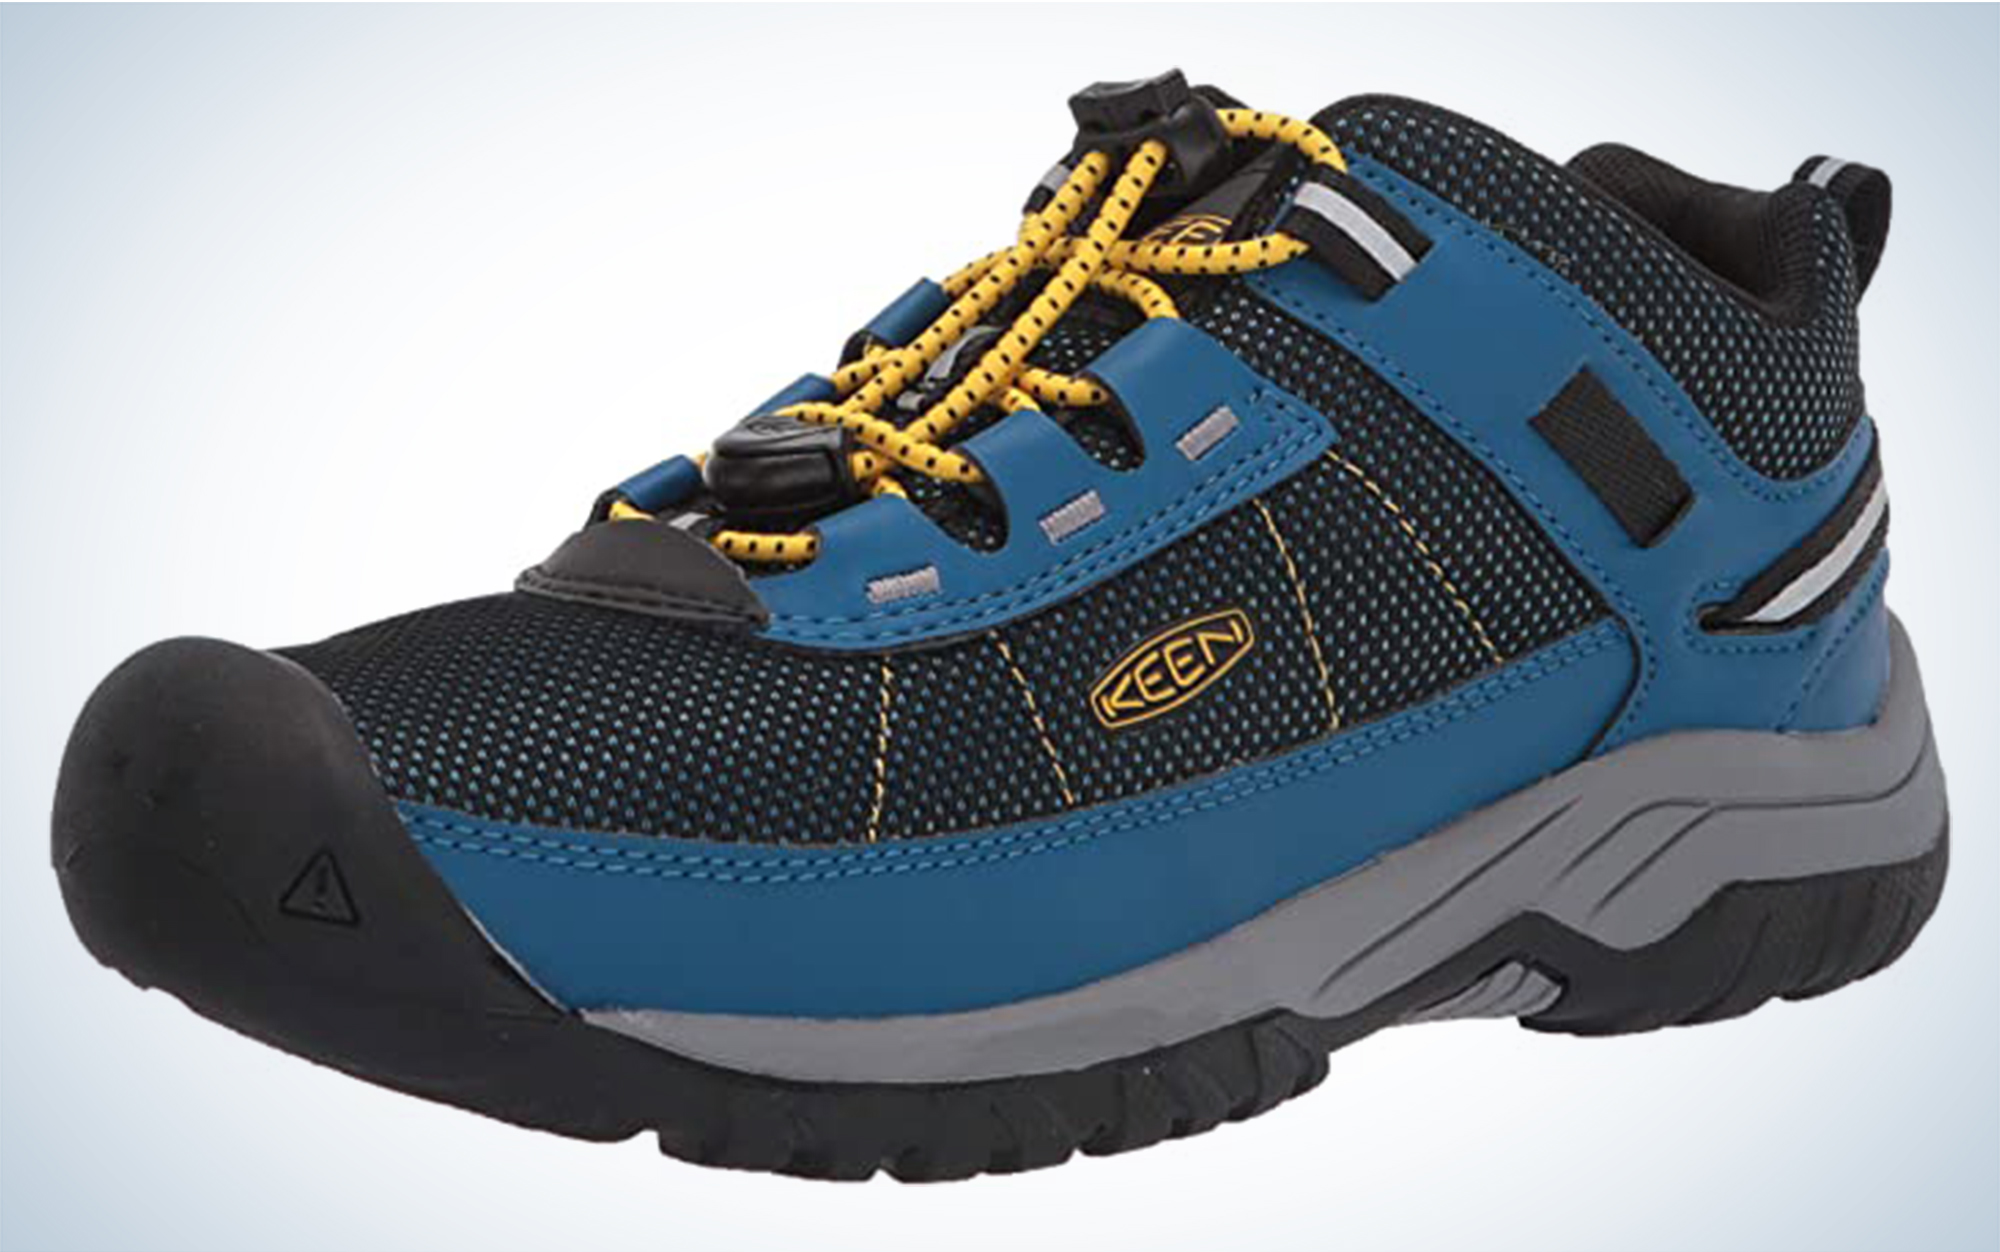 The KEEN Little Kids' Targhee Sport Vent are the most protective kids' hiking shoes.